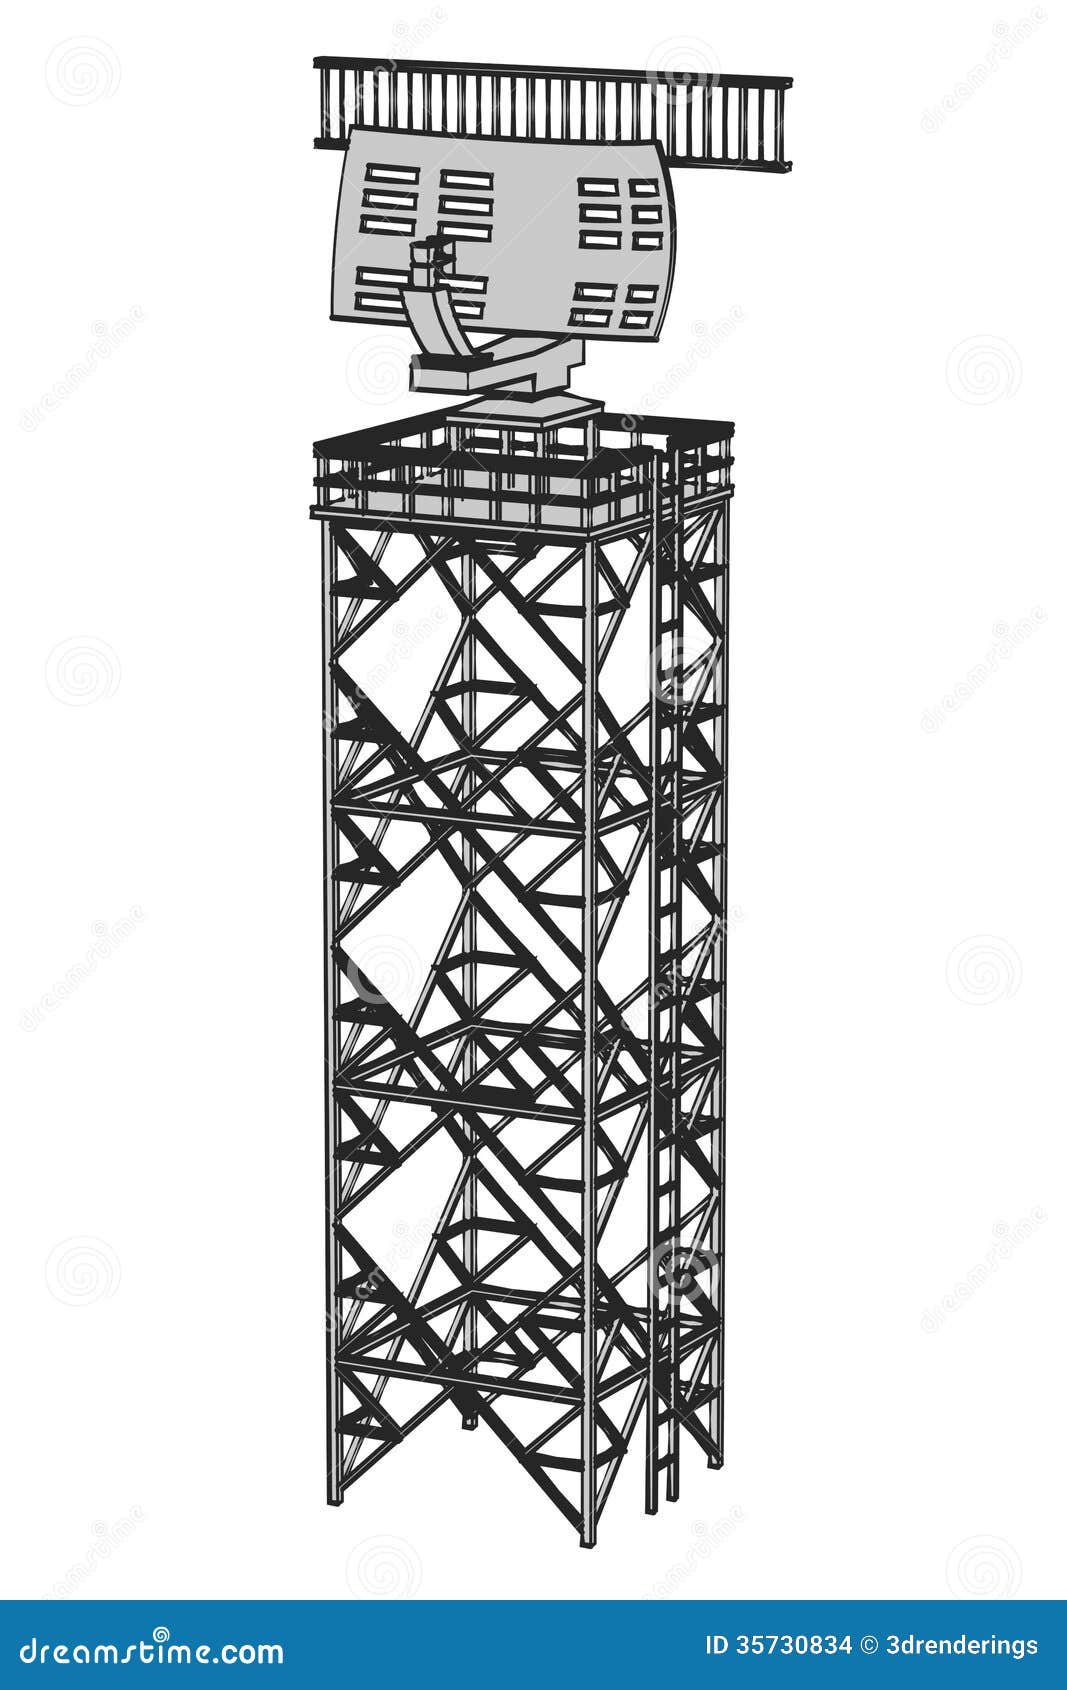 airport tower clipart - photo #47